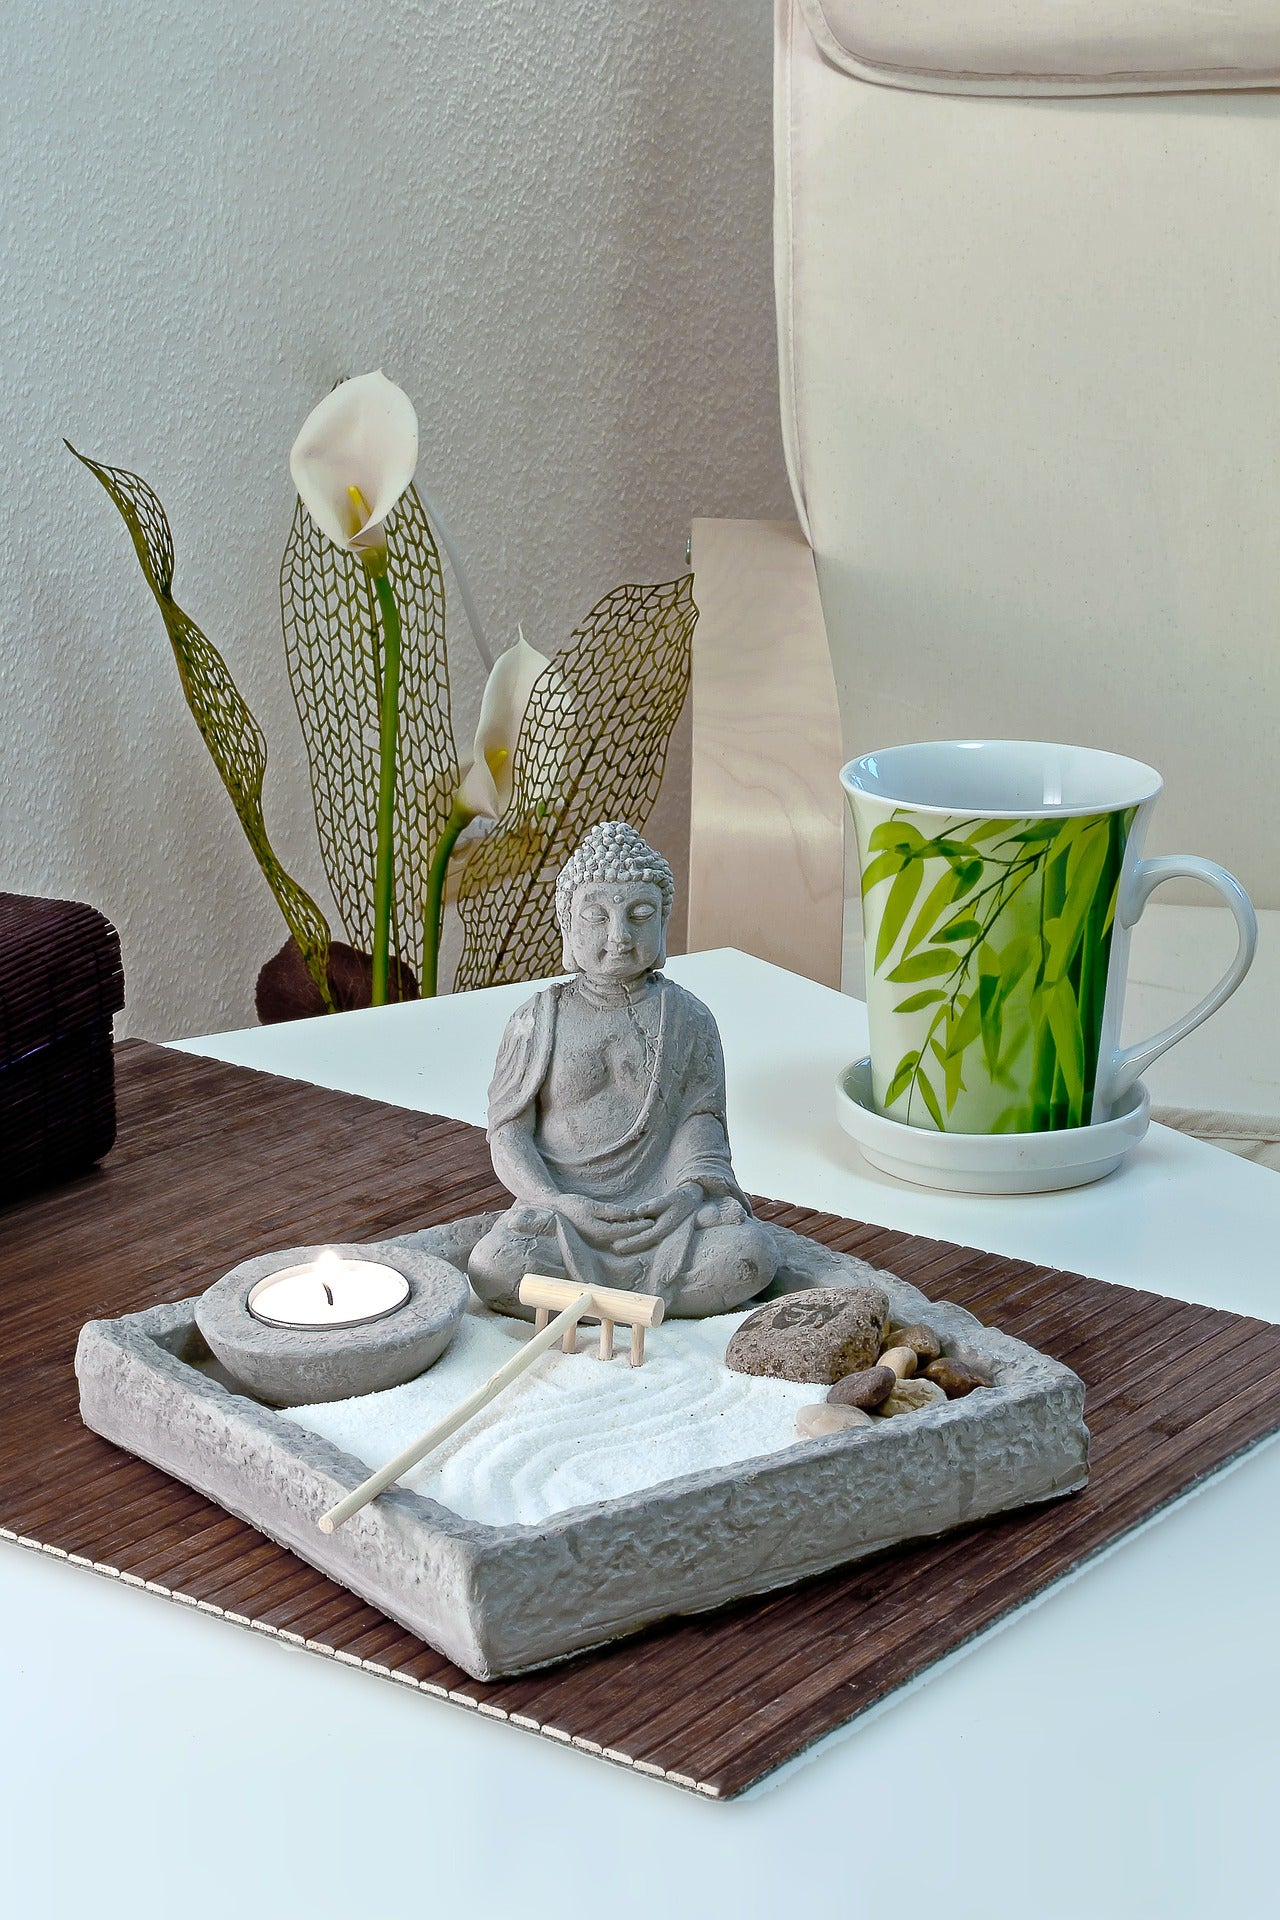 How to Decorate with Candles to Improve Your Feng Shui